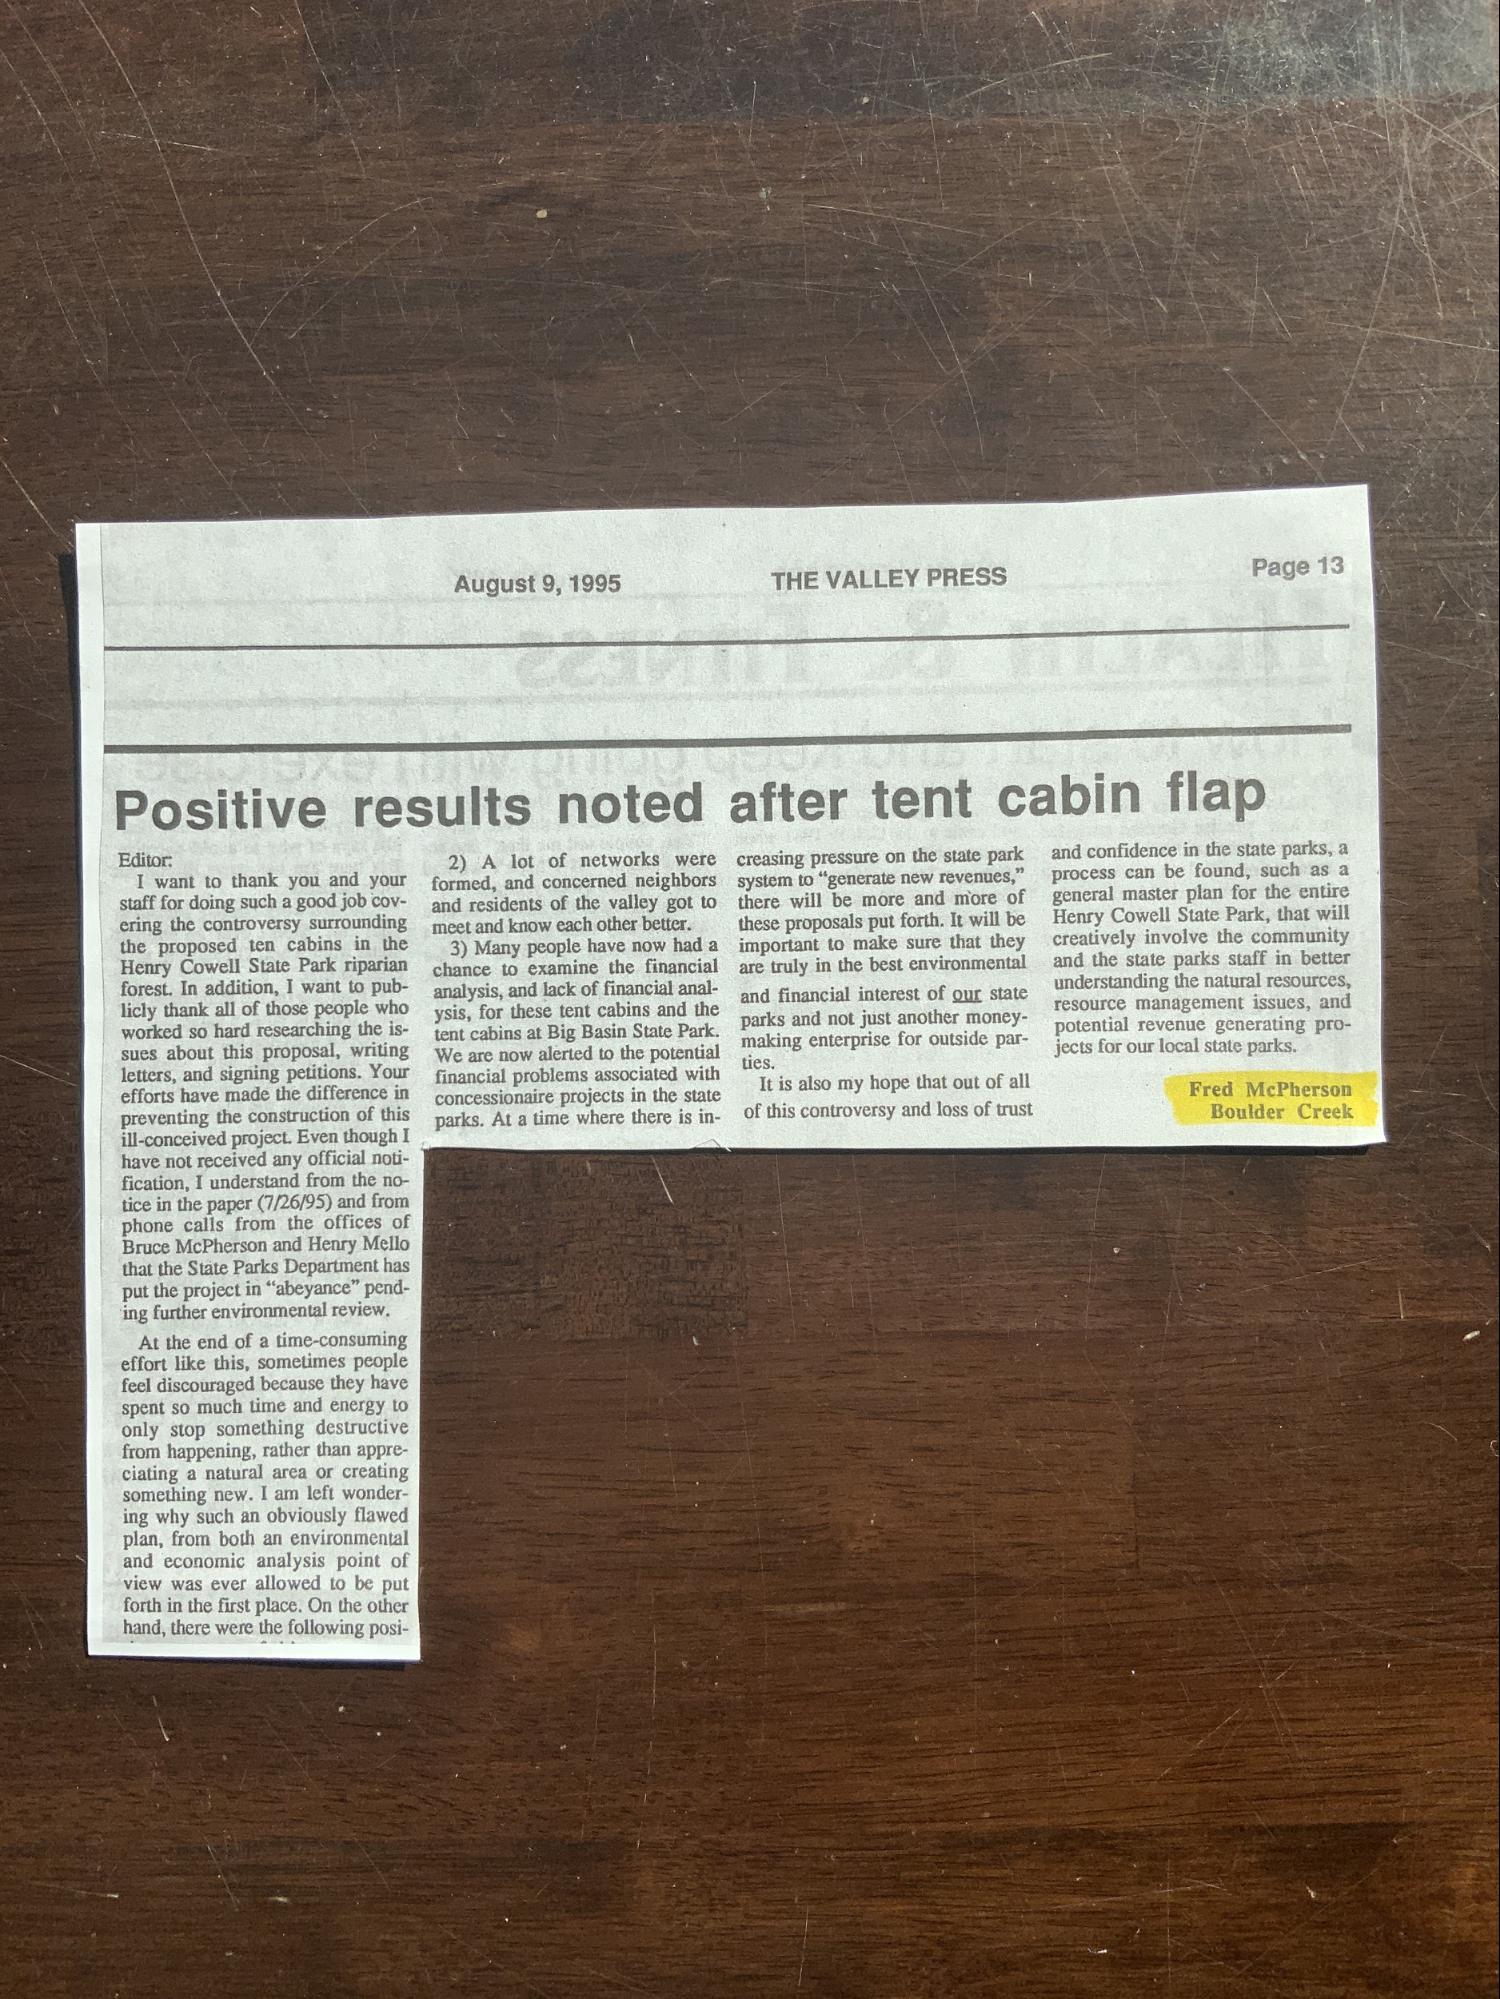 clippings from henry cowell tents fight